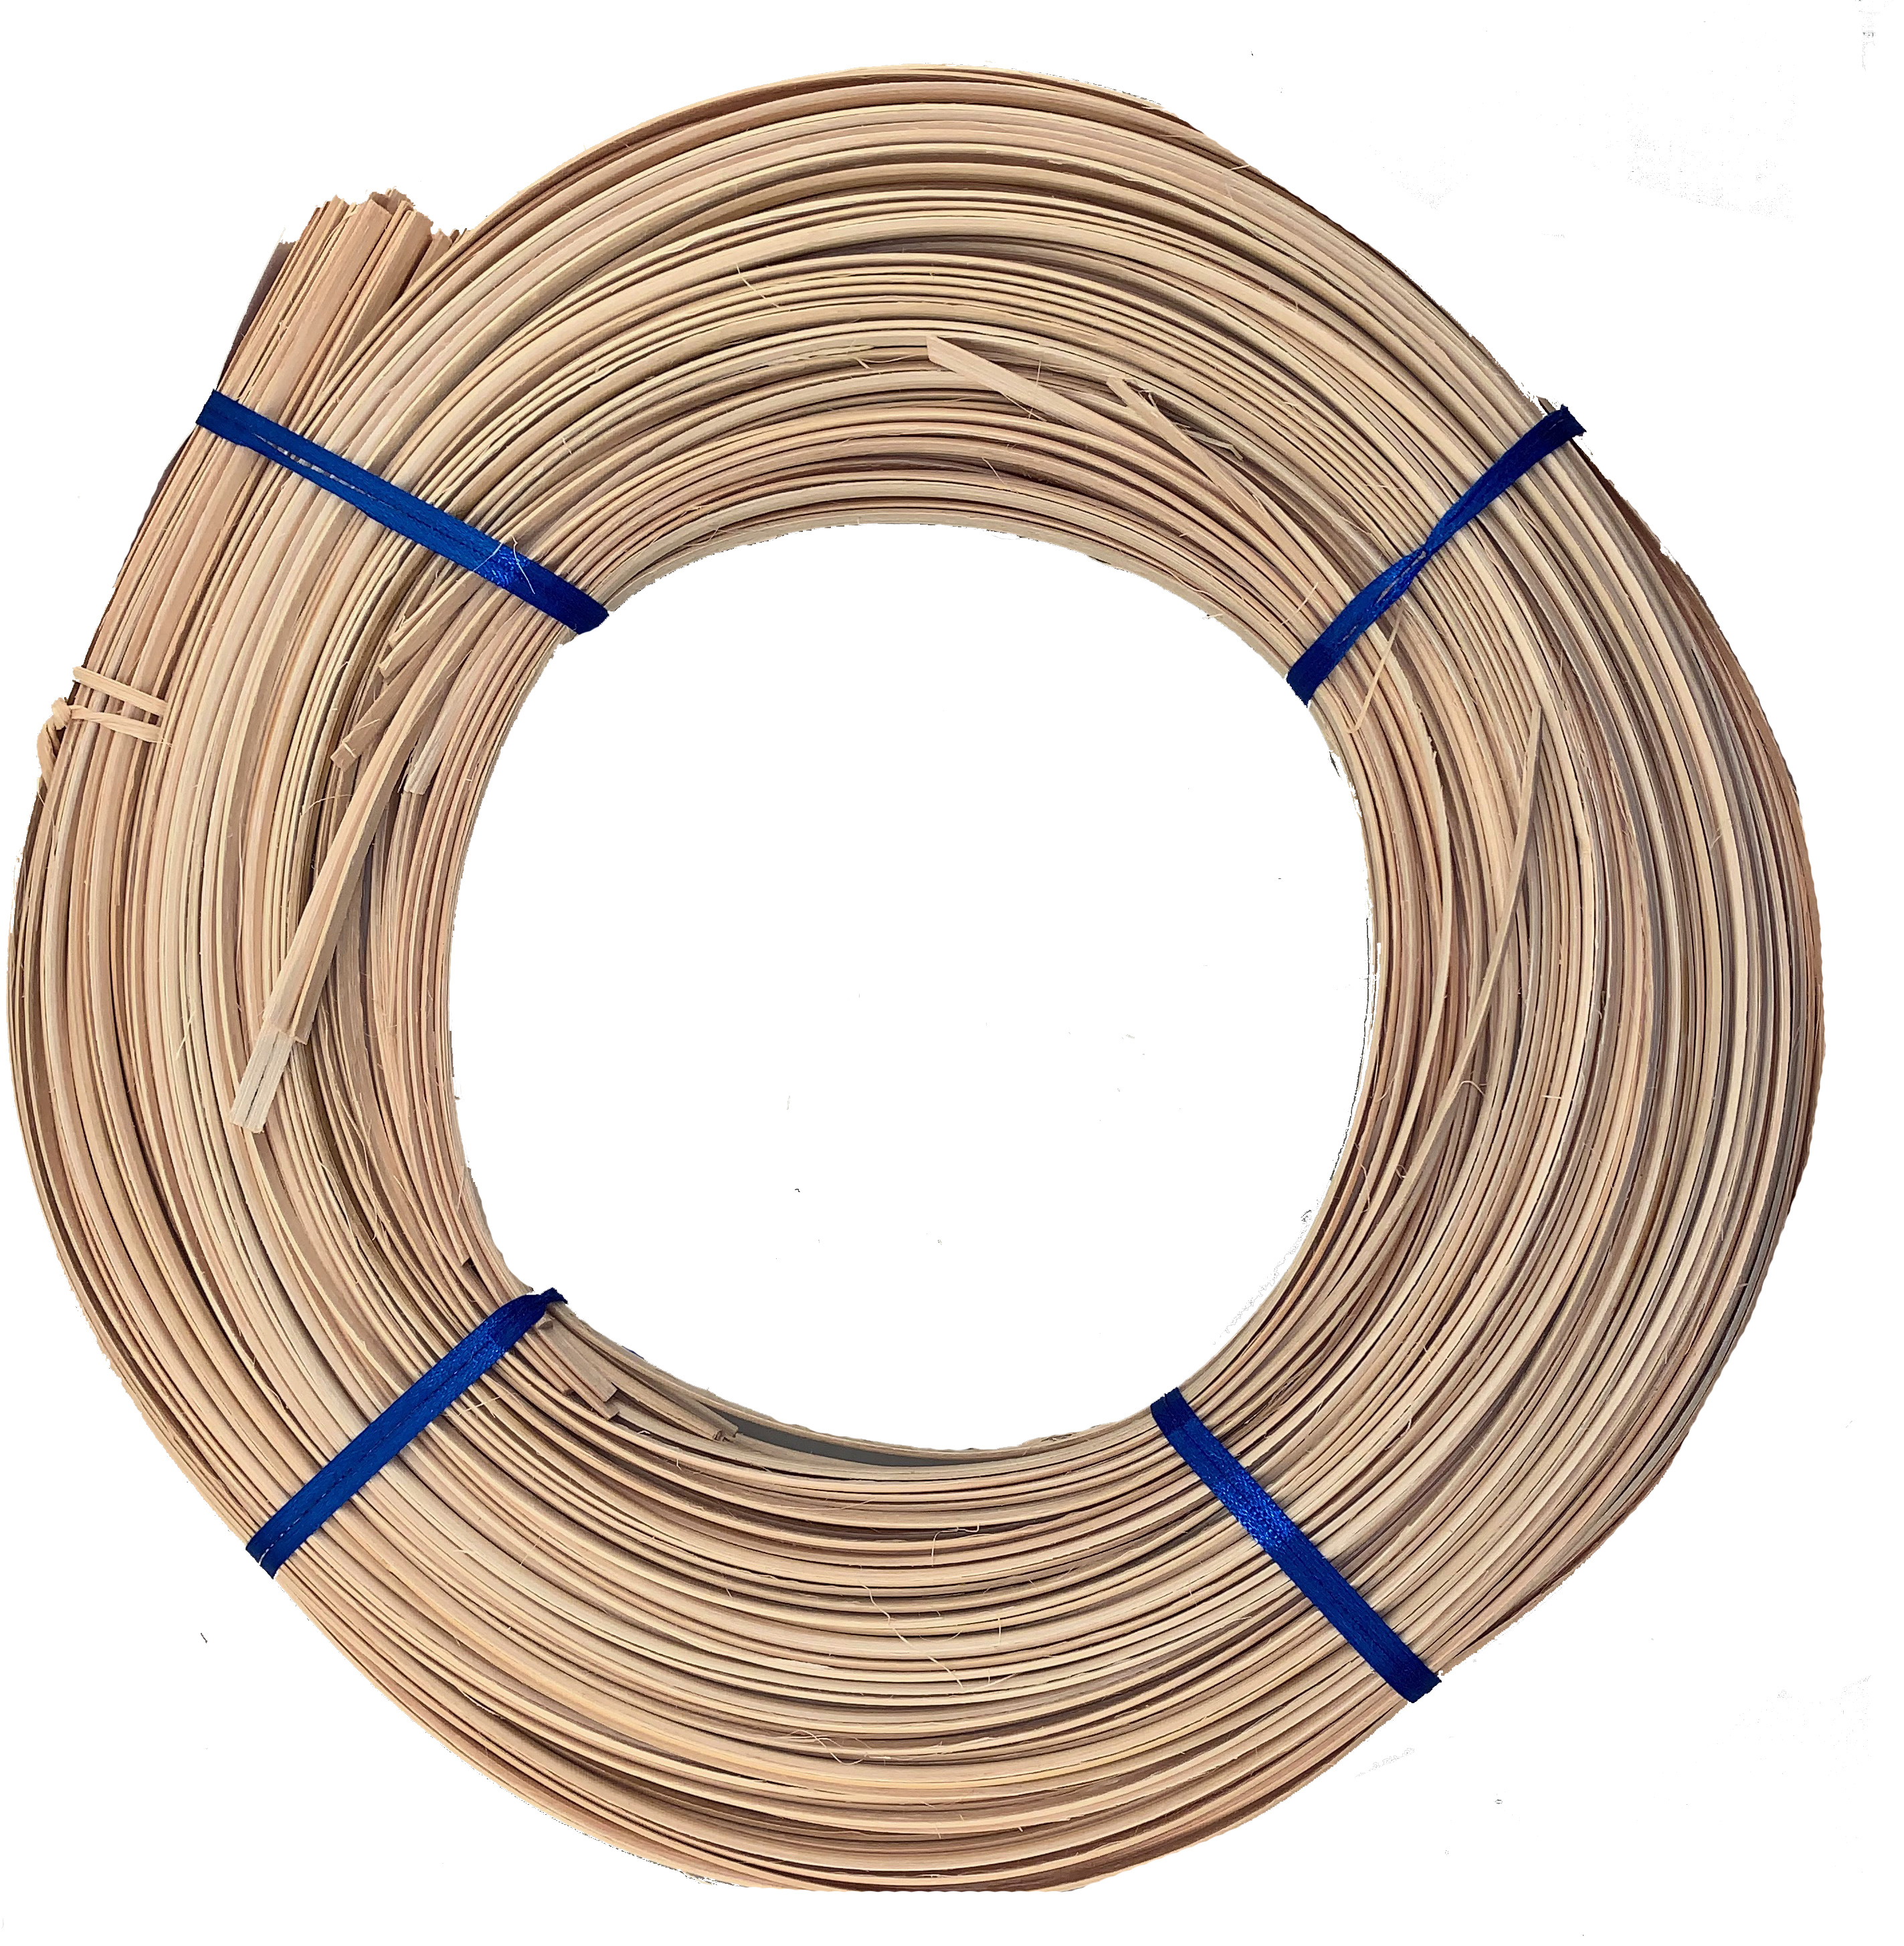 11/64 flat oval reed - 275 ft.